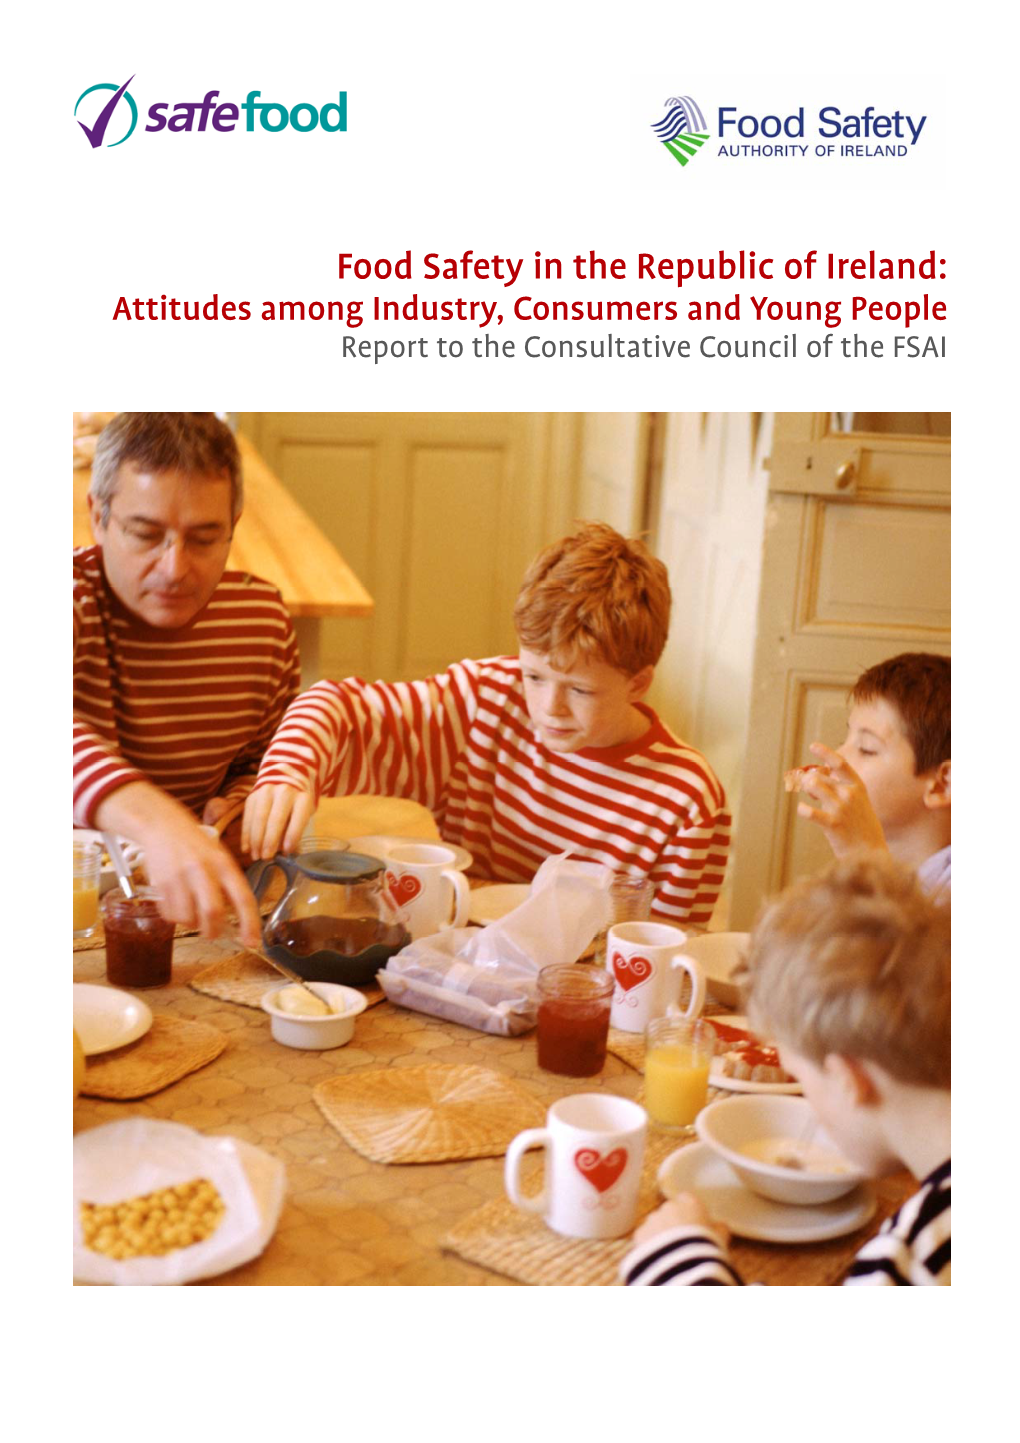 Food Safety in the Republic of Ireland: Attitudes Among Industry, Consumers and Young People Report to the Consultative Council of the FSAI